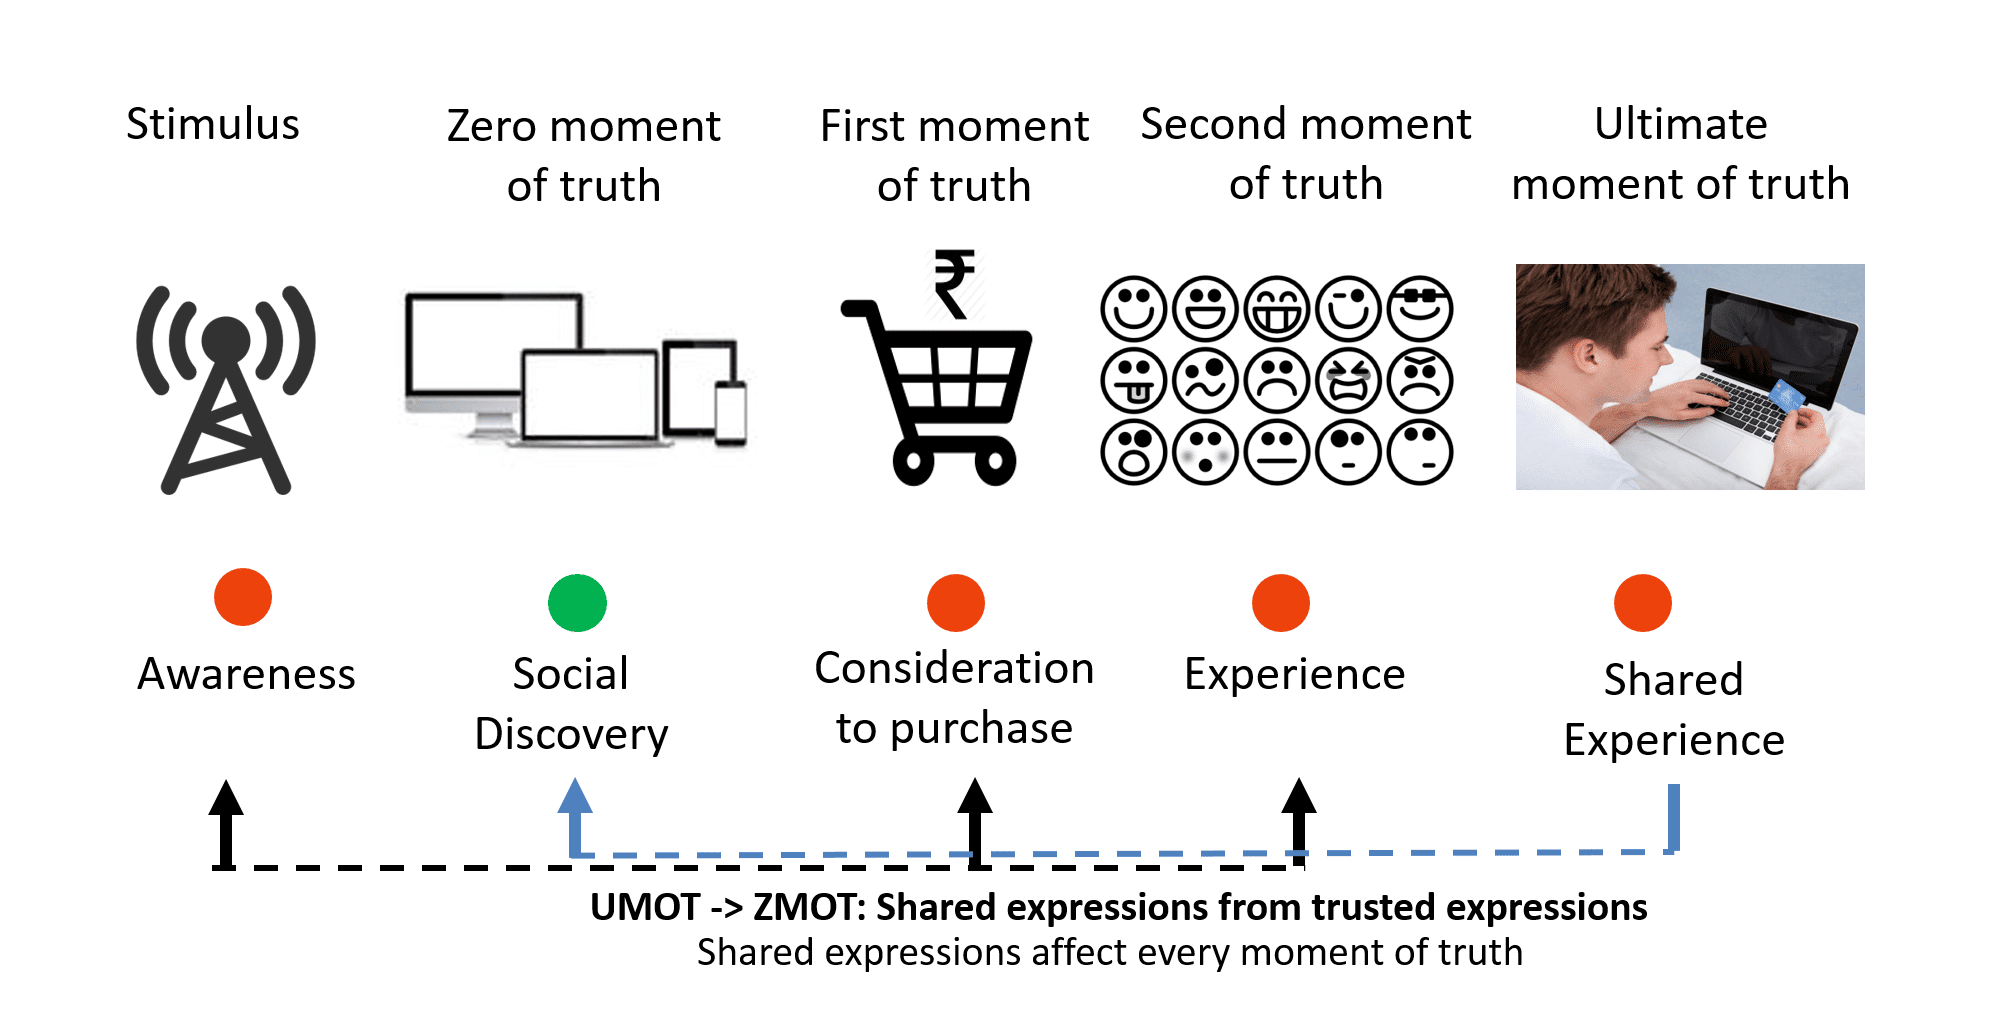 General definitions and steps of moments of truth